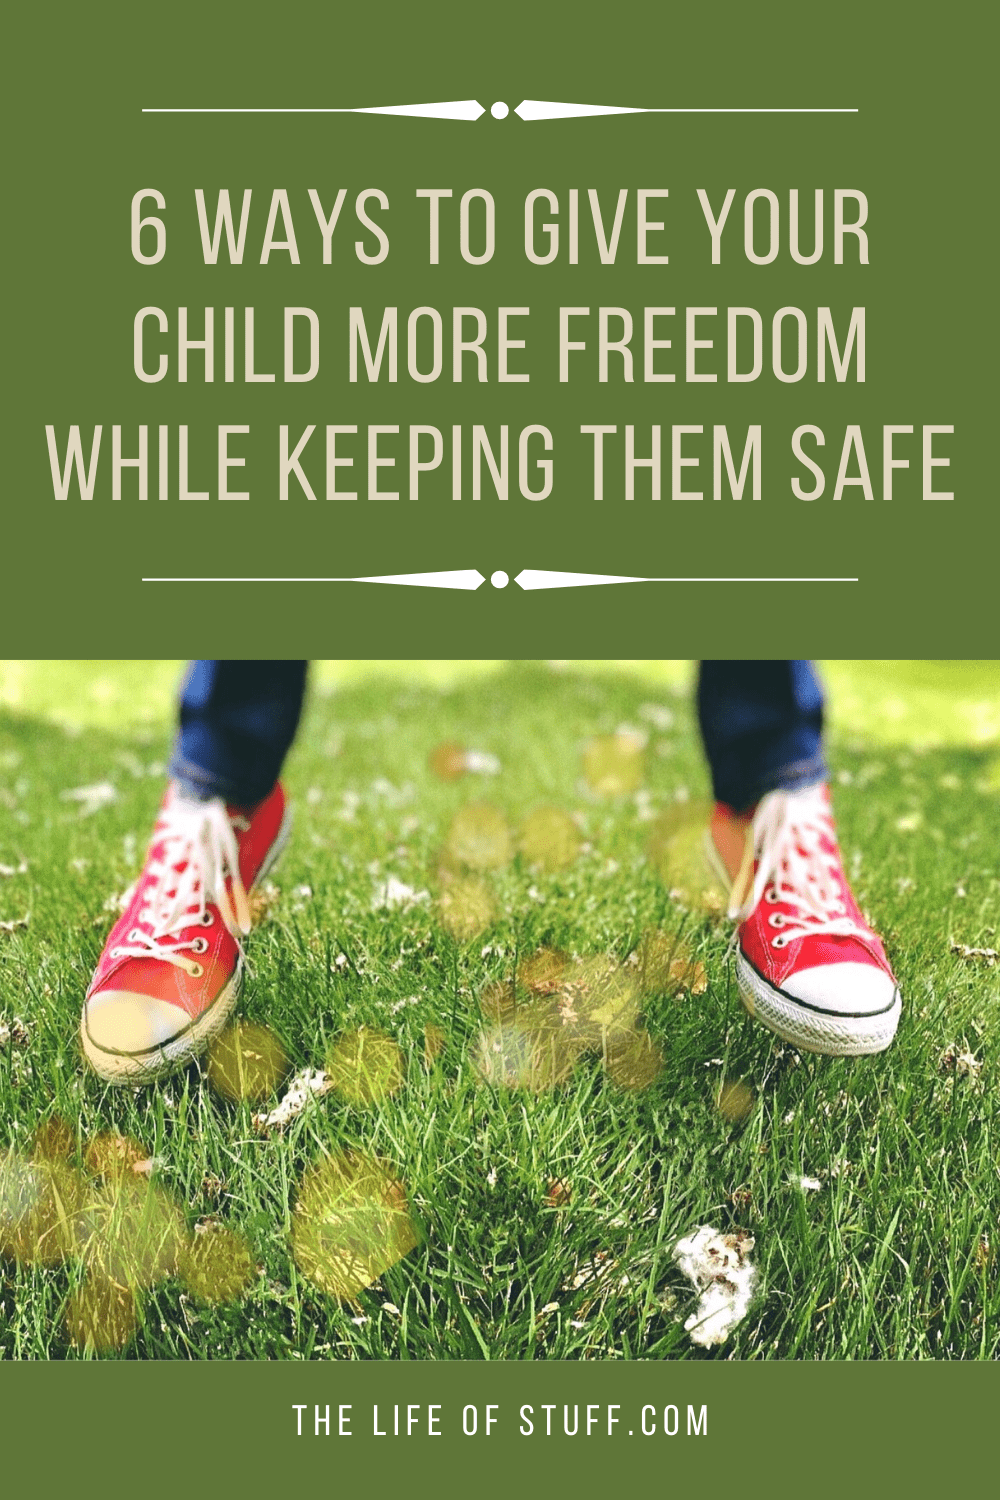 6 Ways to Give Your Child More Freedom Safely - The Life of Stuff